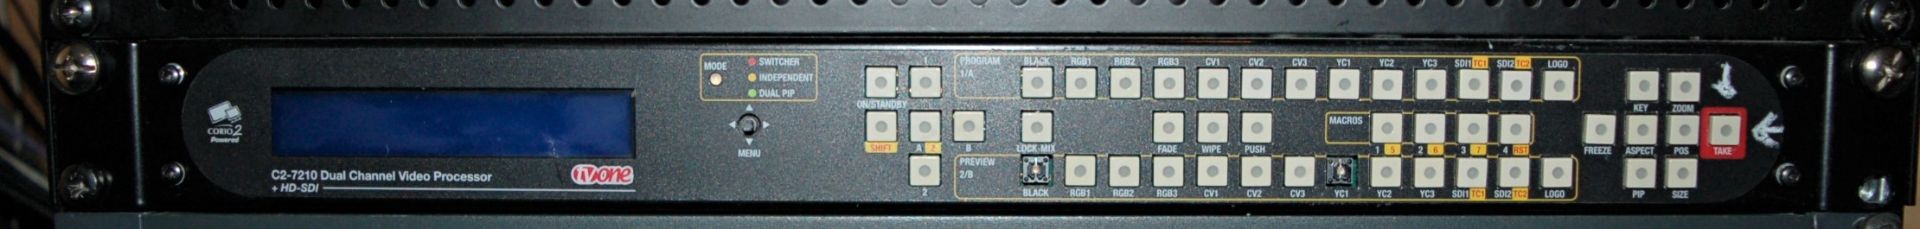 A TV ONE C2-7210 Dual Channel Video Processor